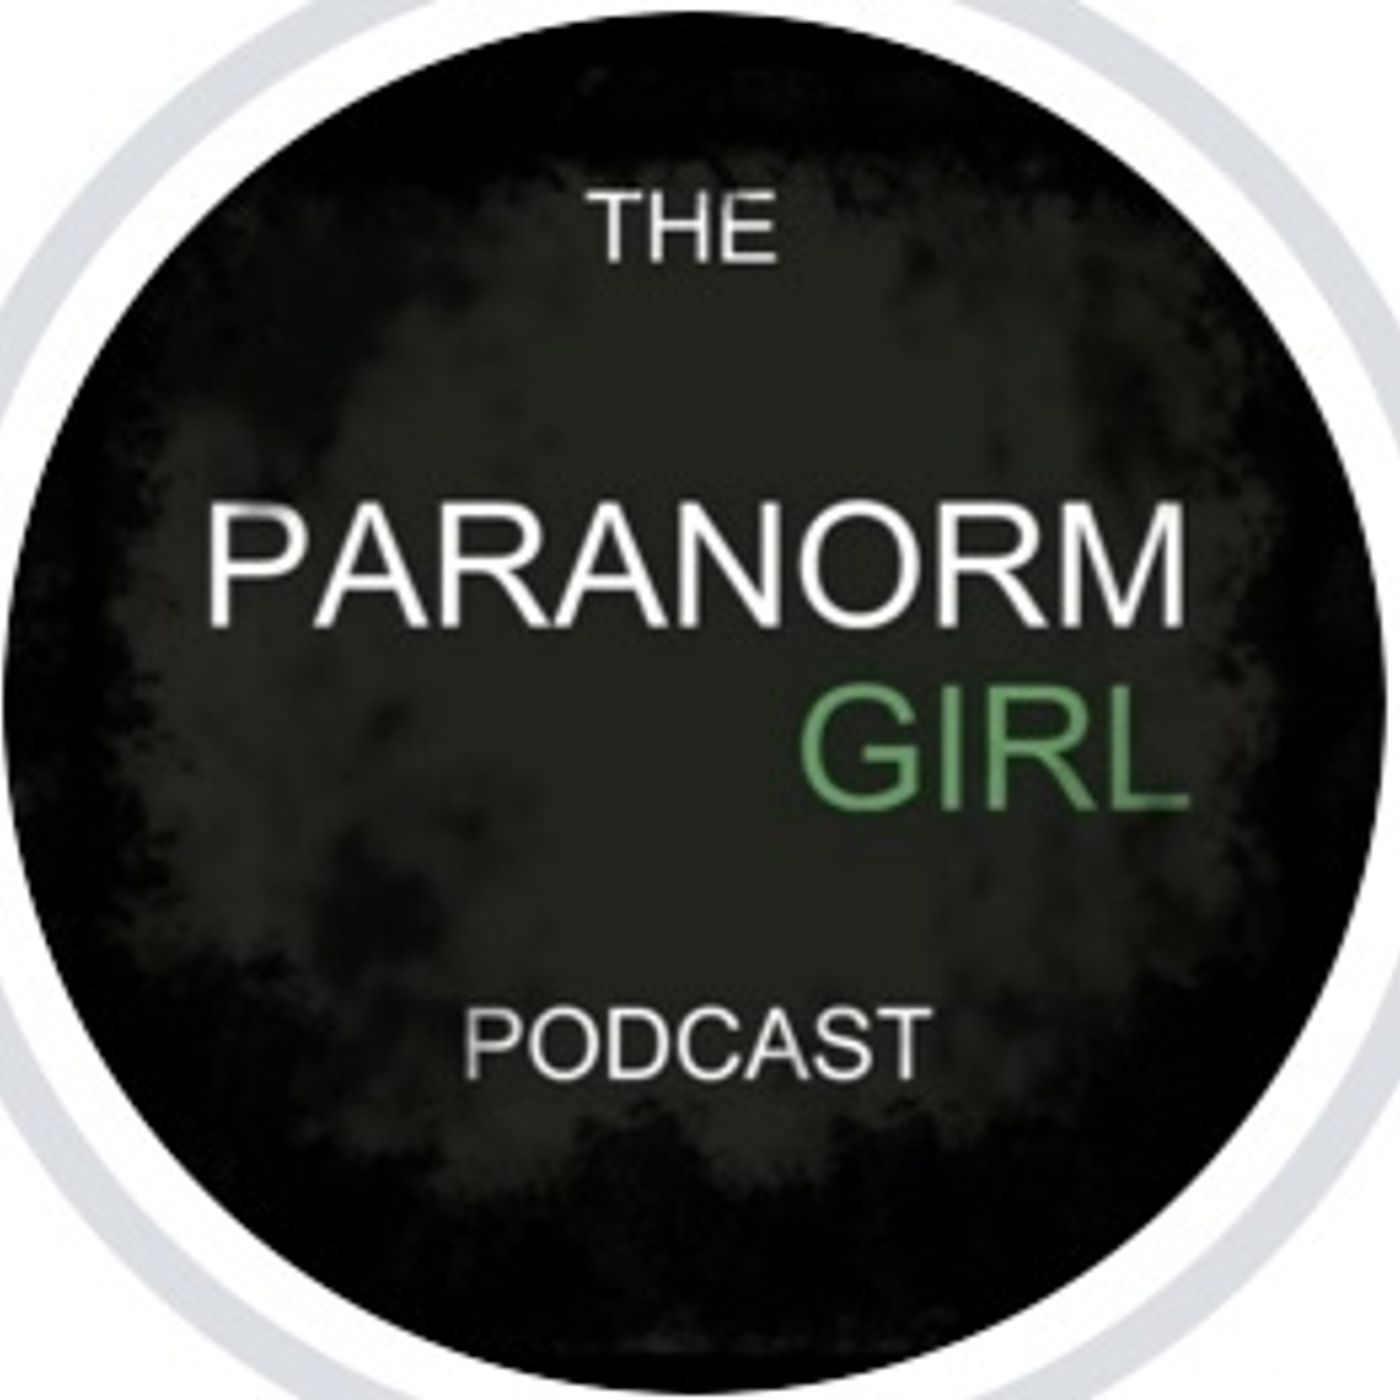 Bonus Episode - The Paranorm Girl Podcast Interview with MAACO